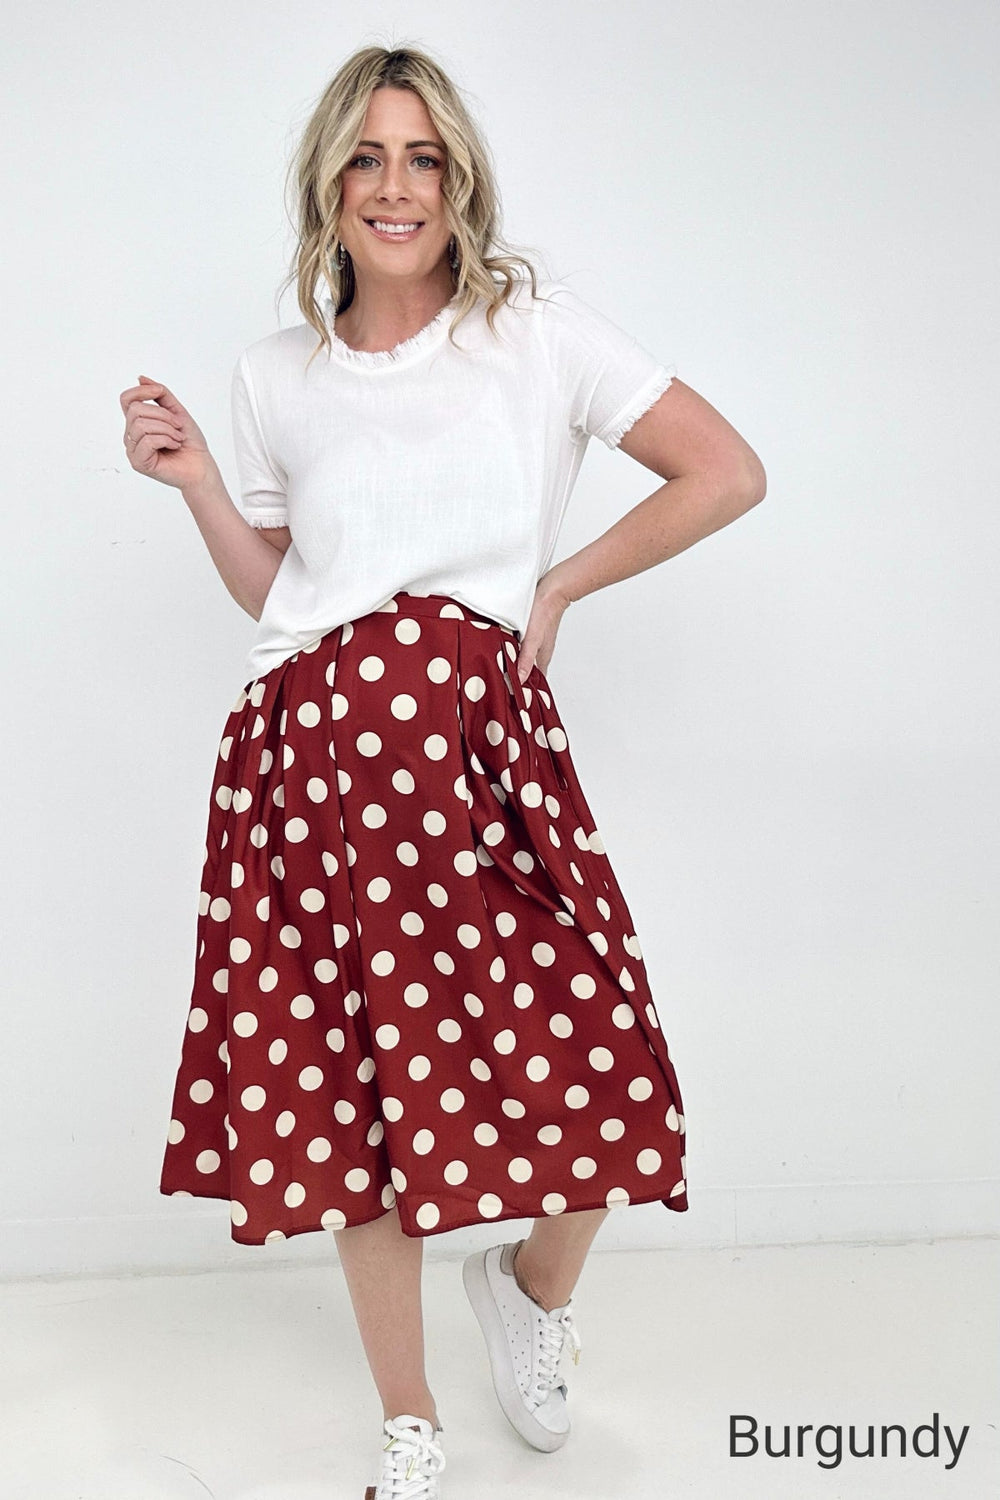 Jade By Jane Polka Dot Pleated Midi Skirt-Skirts-Inspired by Justeen-Women's Clothing Boutique in Chicago, Illinois